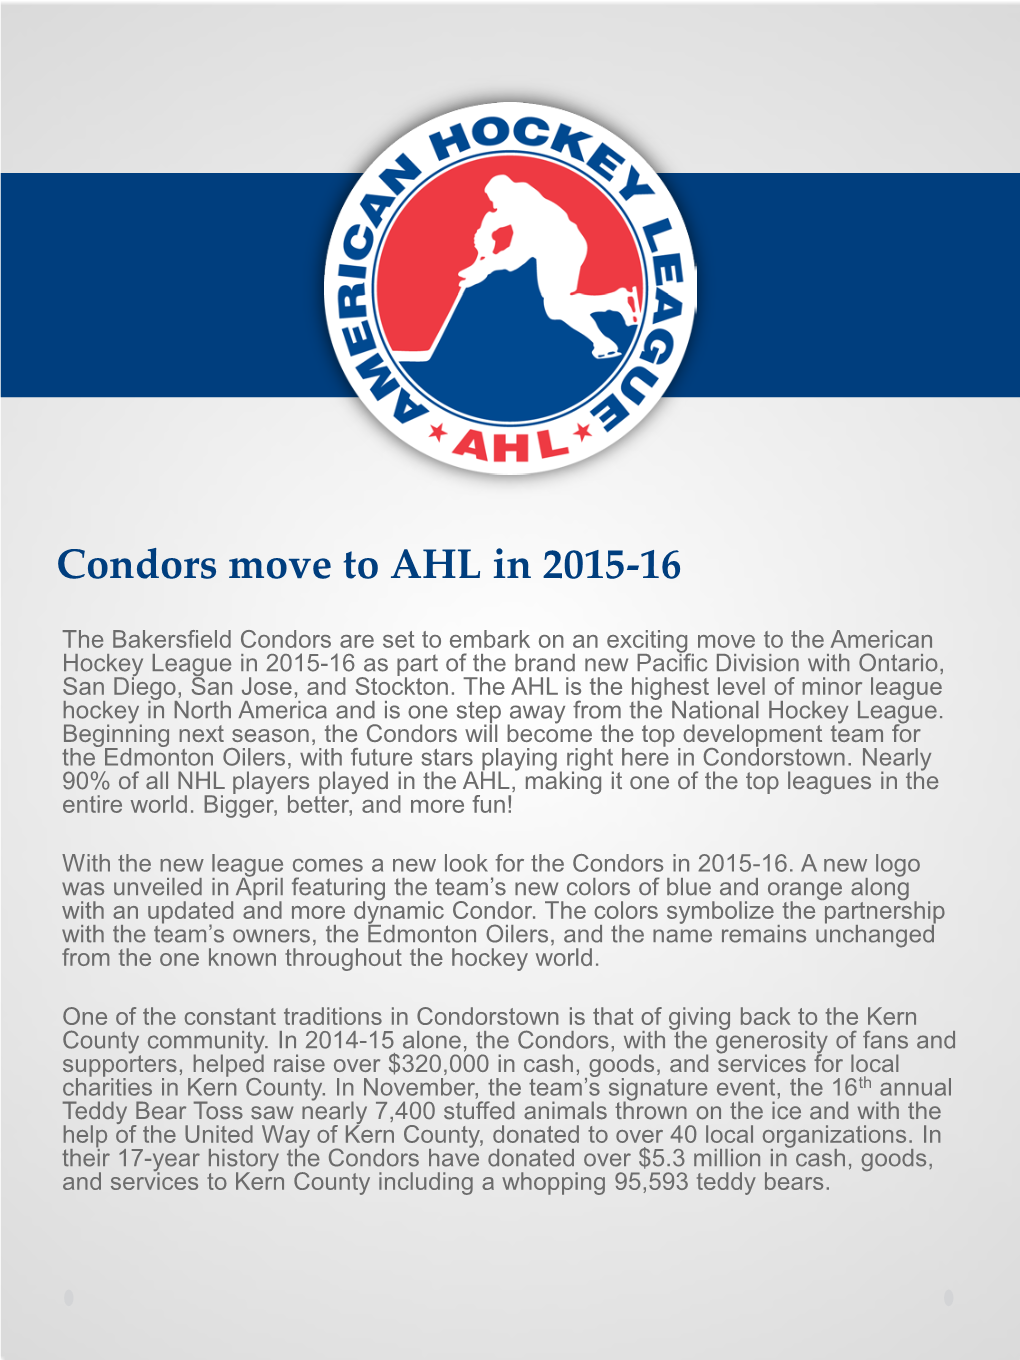 Condors Move to AHL in 2015-16